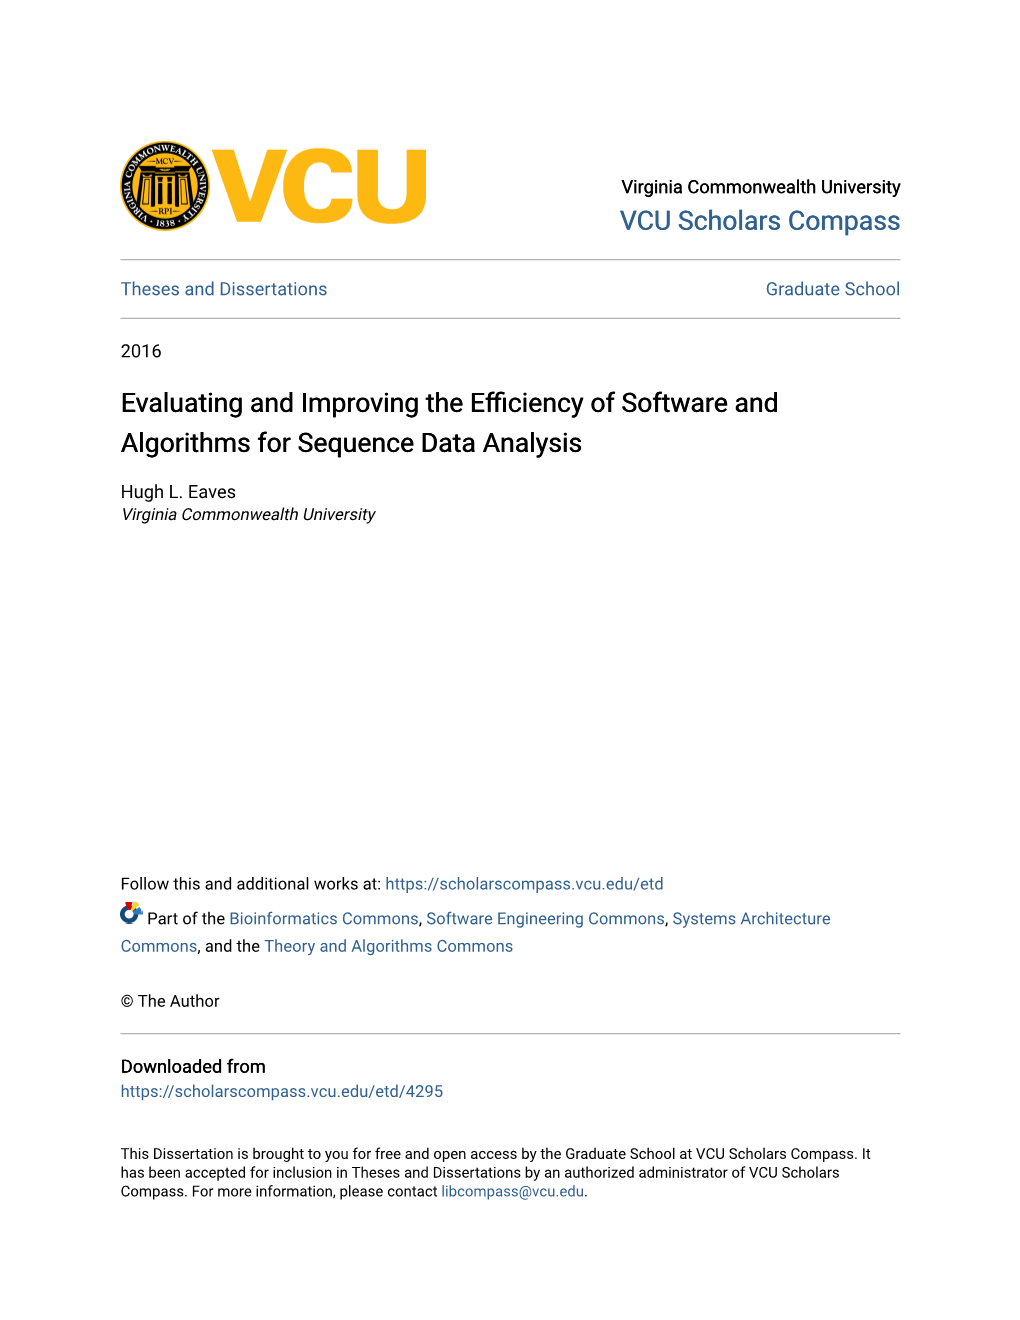 Evaluating and Improving the Efficiency of Software and Algorithms for Sequence Data Analysis